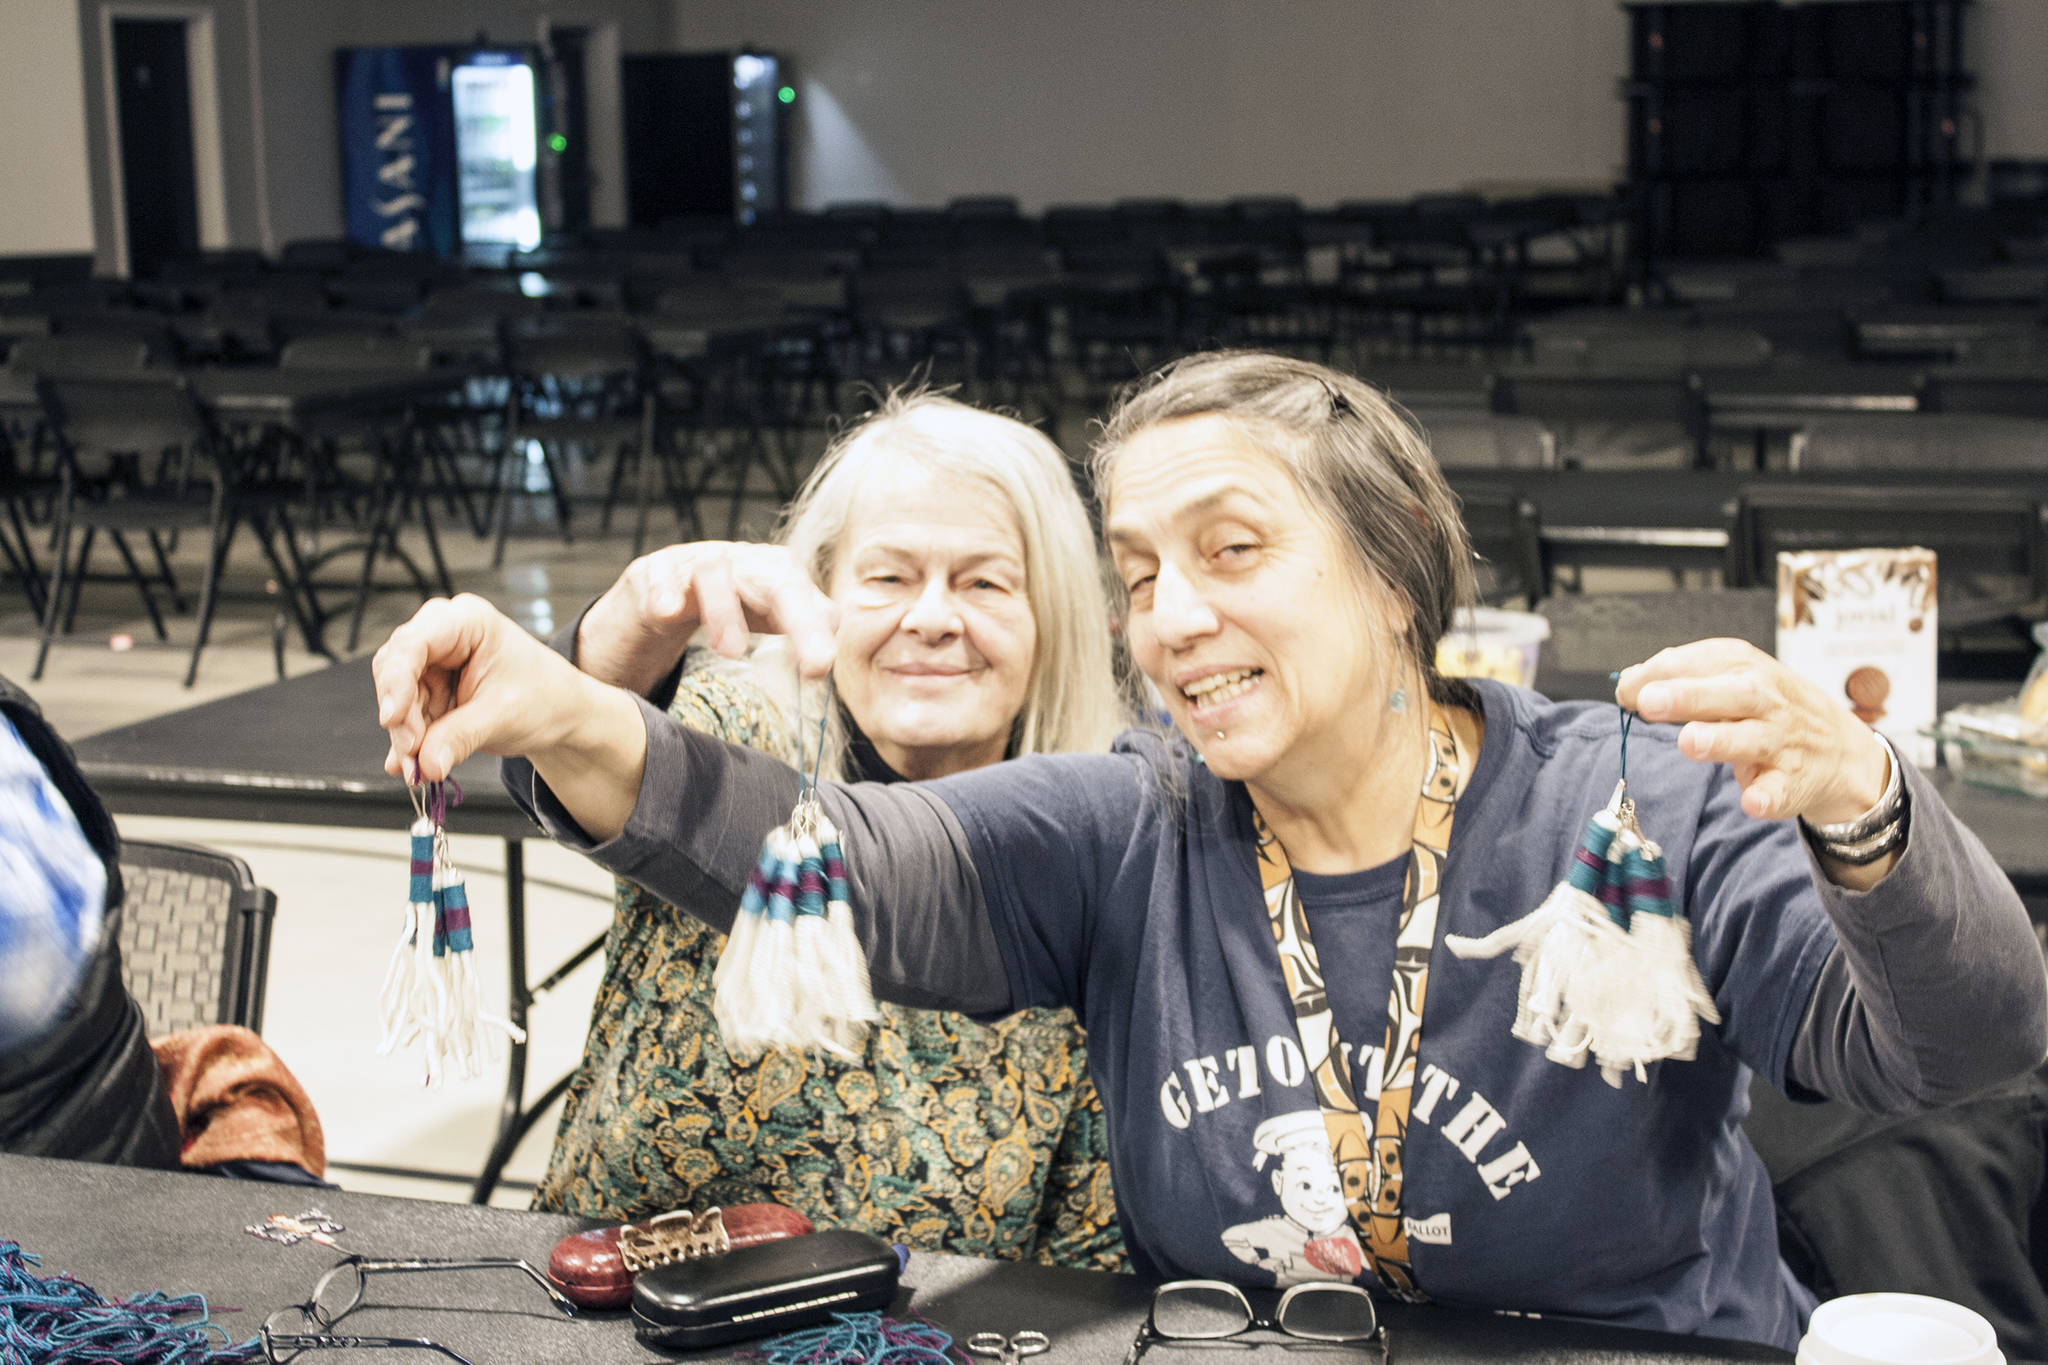 Kay Field Parker and Skeenyàa Tlàa Nancy Keen hold up bunches of zipper pulls, Sunday, Jan. 20, 2020. Both weavers were part of a 12-person group working to create the Chilkat tunic fringe zipper pulls that will be distributed to attendees of the Gathering of the Robes. (Ben Hohenstatt | Capital City Weekly)